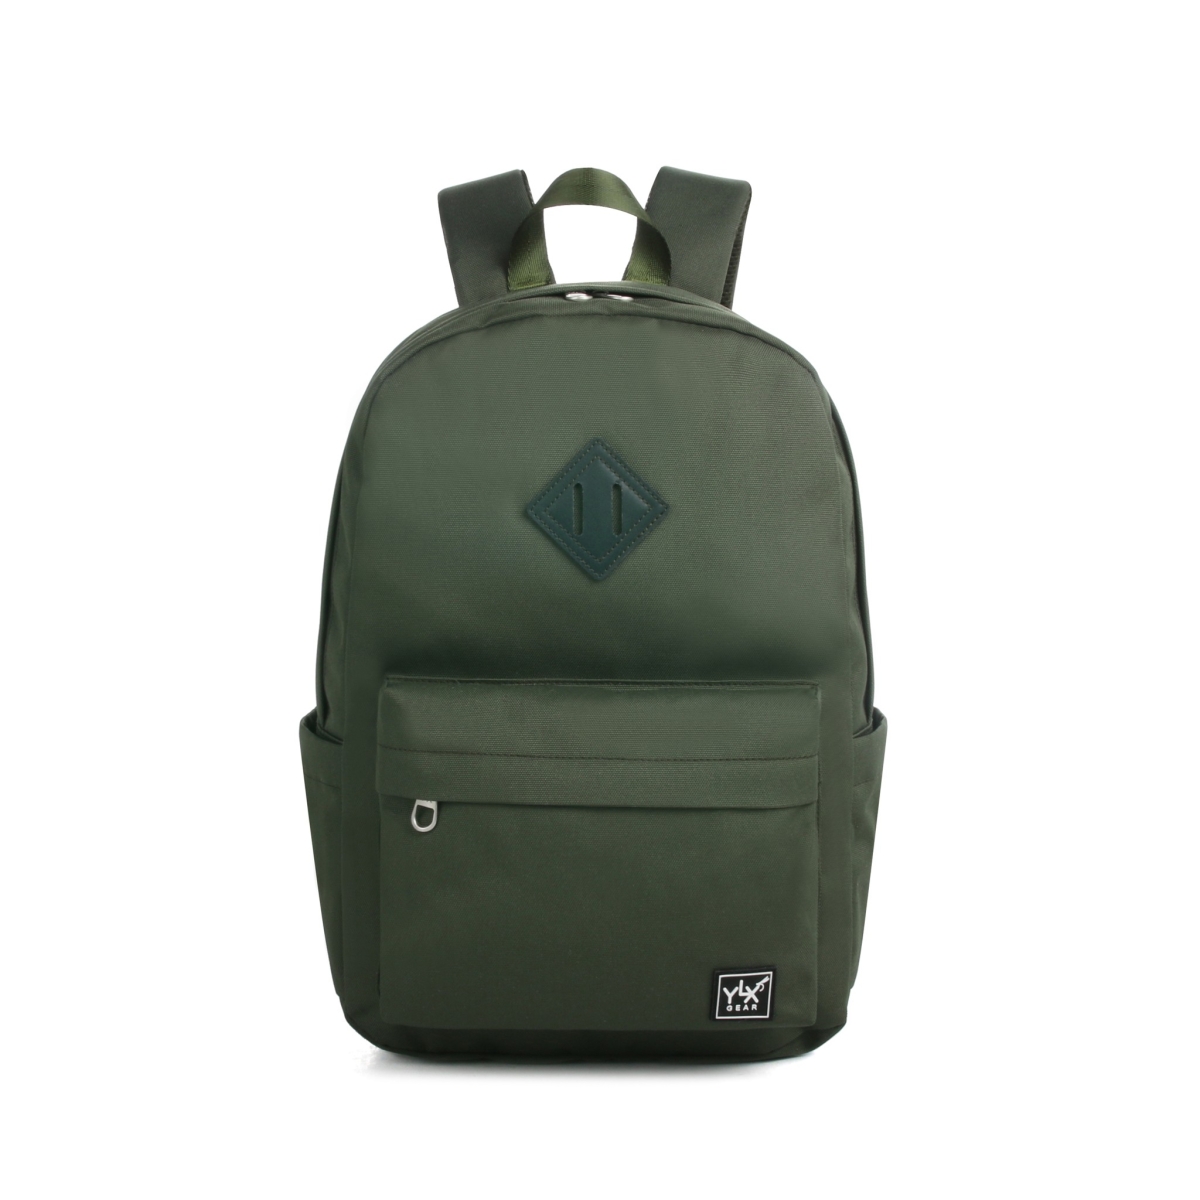 YLX Finch Backpack | Bronze Green